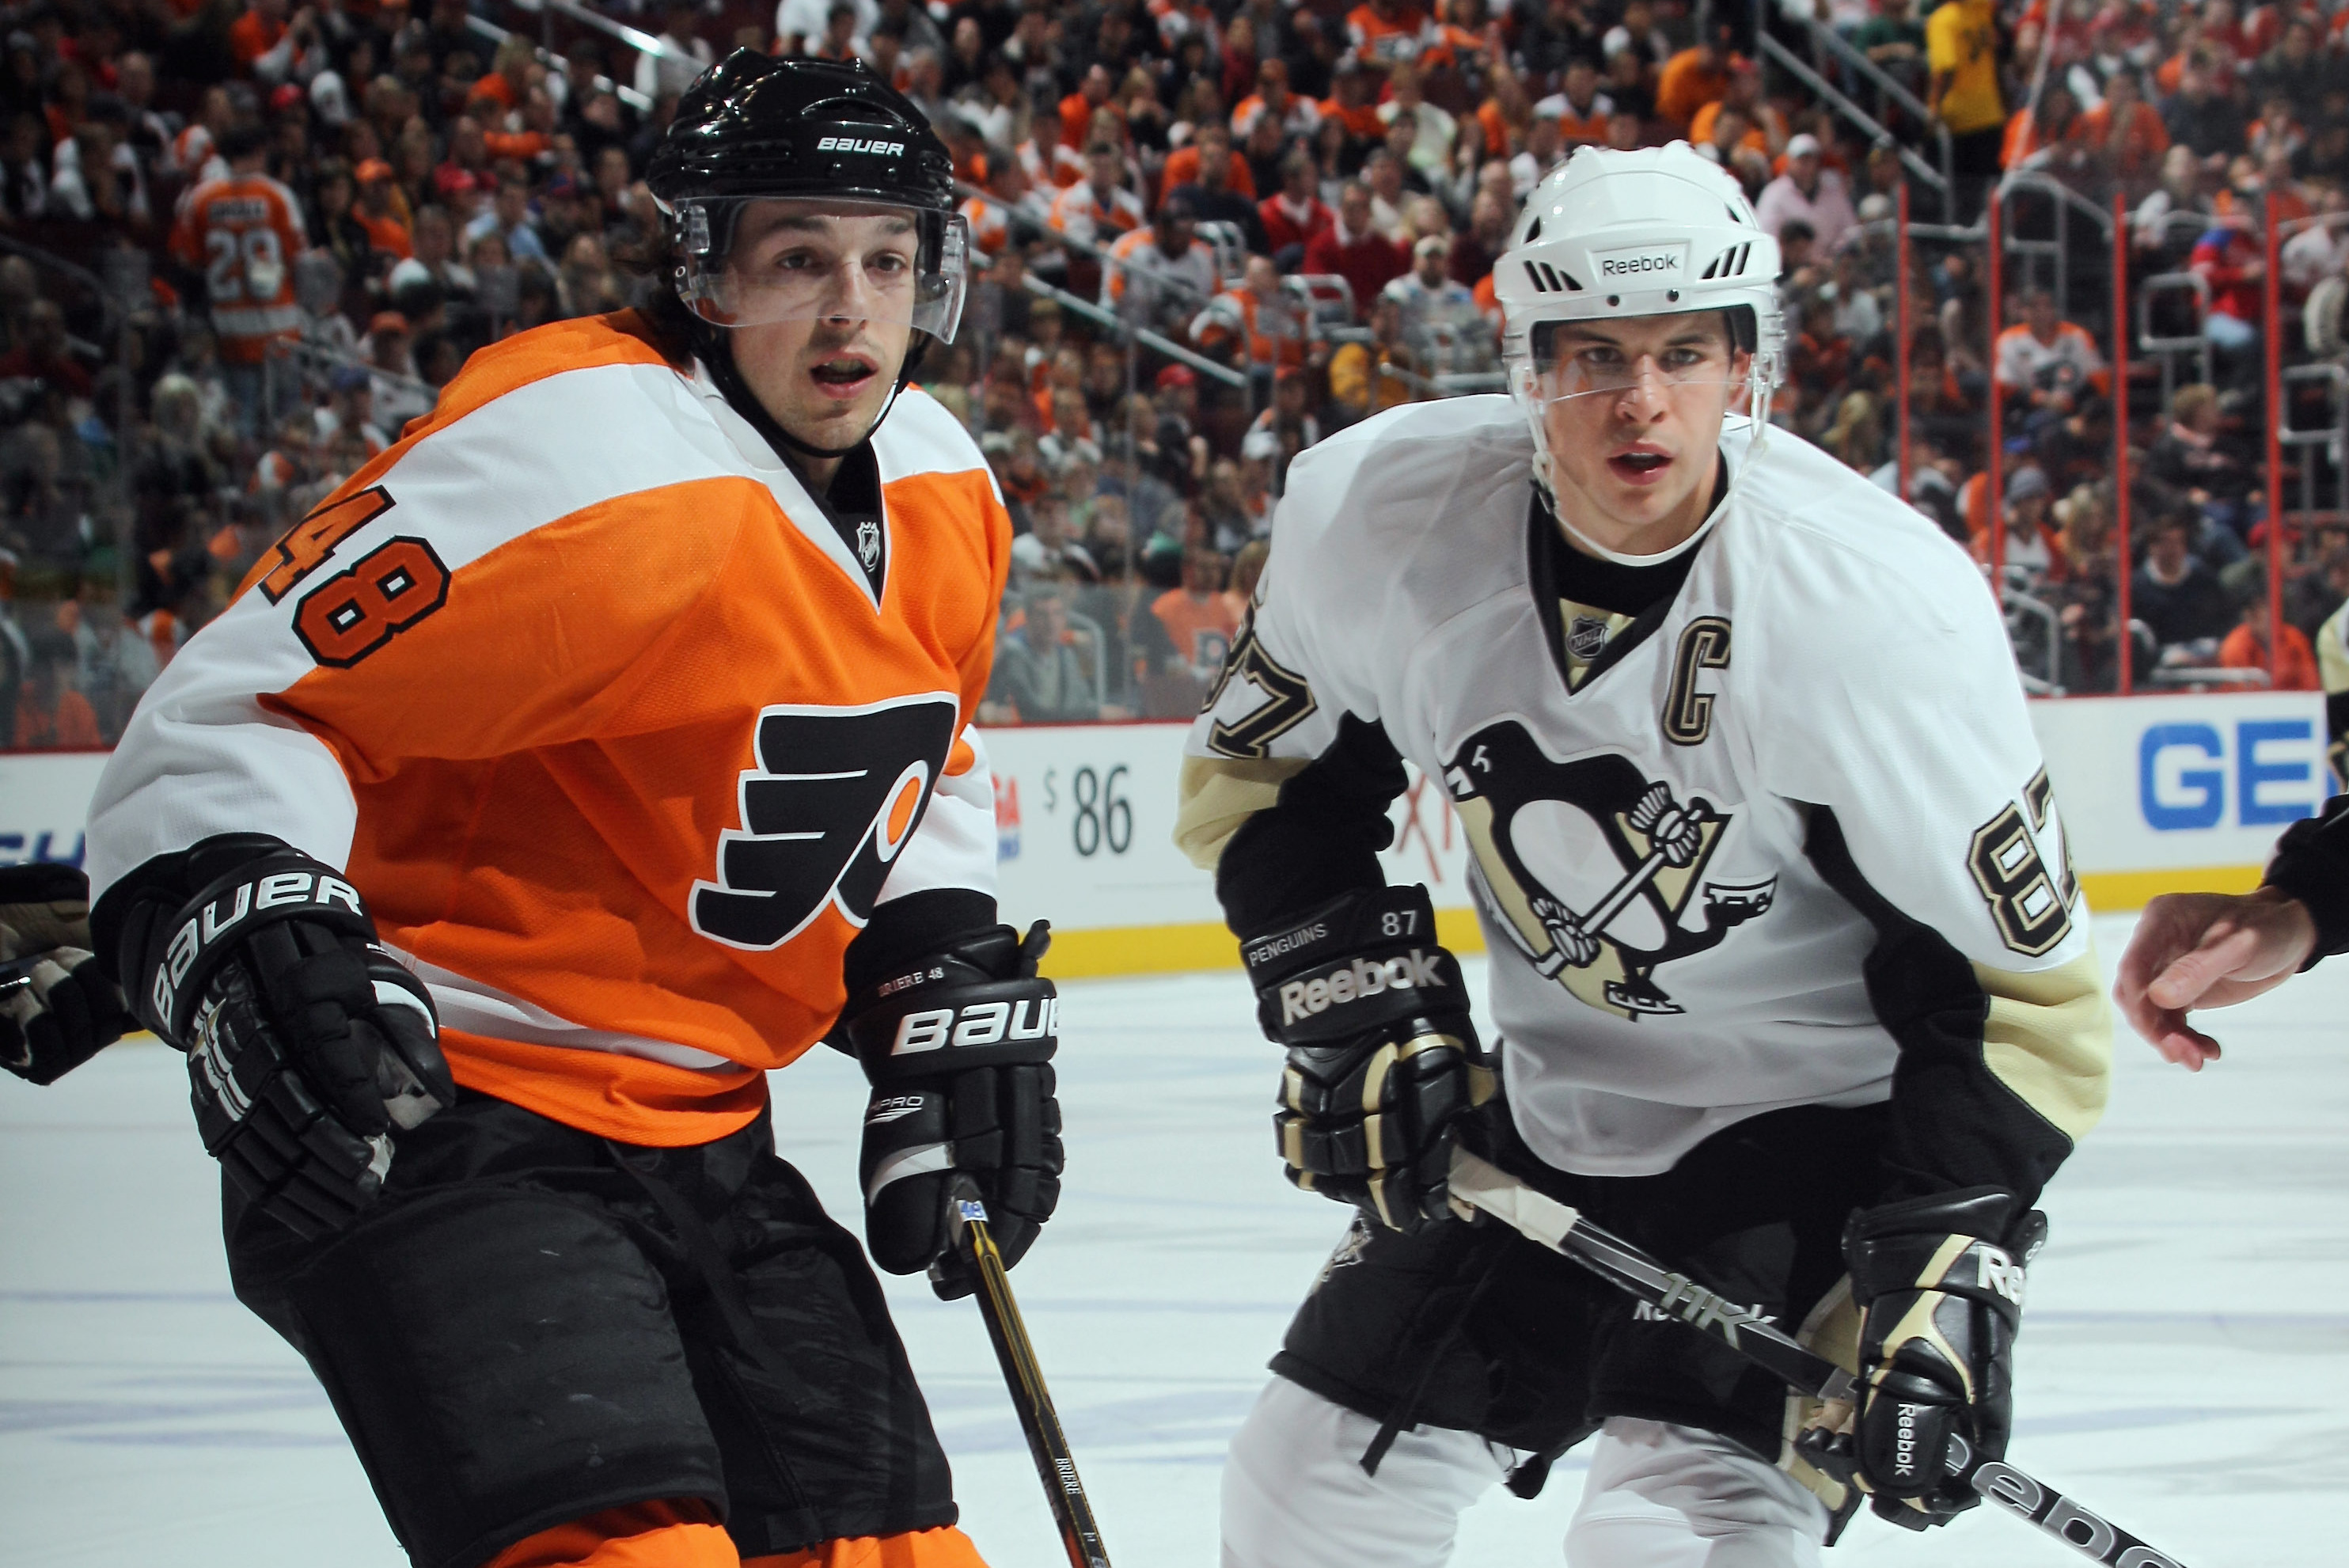 Flyers Playoff Schedule 2012: Odds & Predictions for Opening Series vs. Penguins